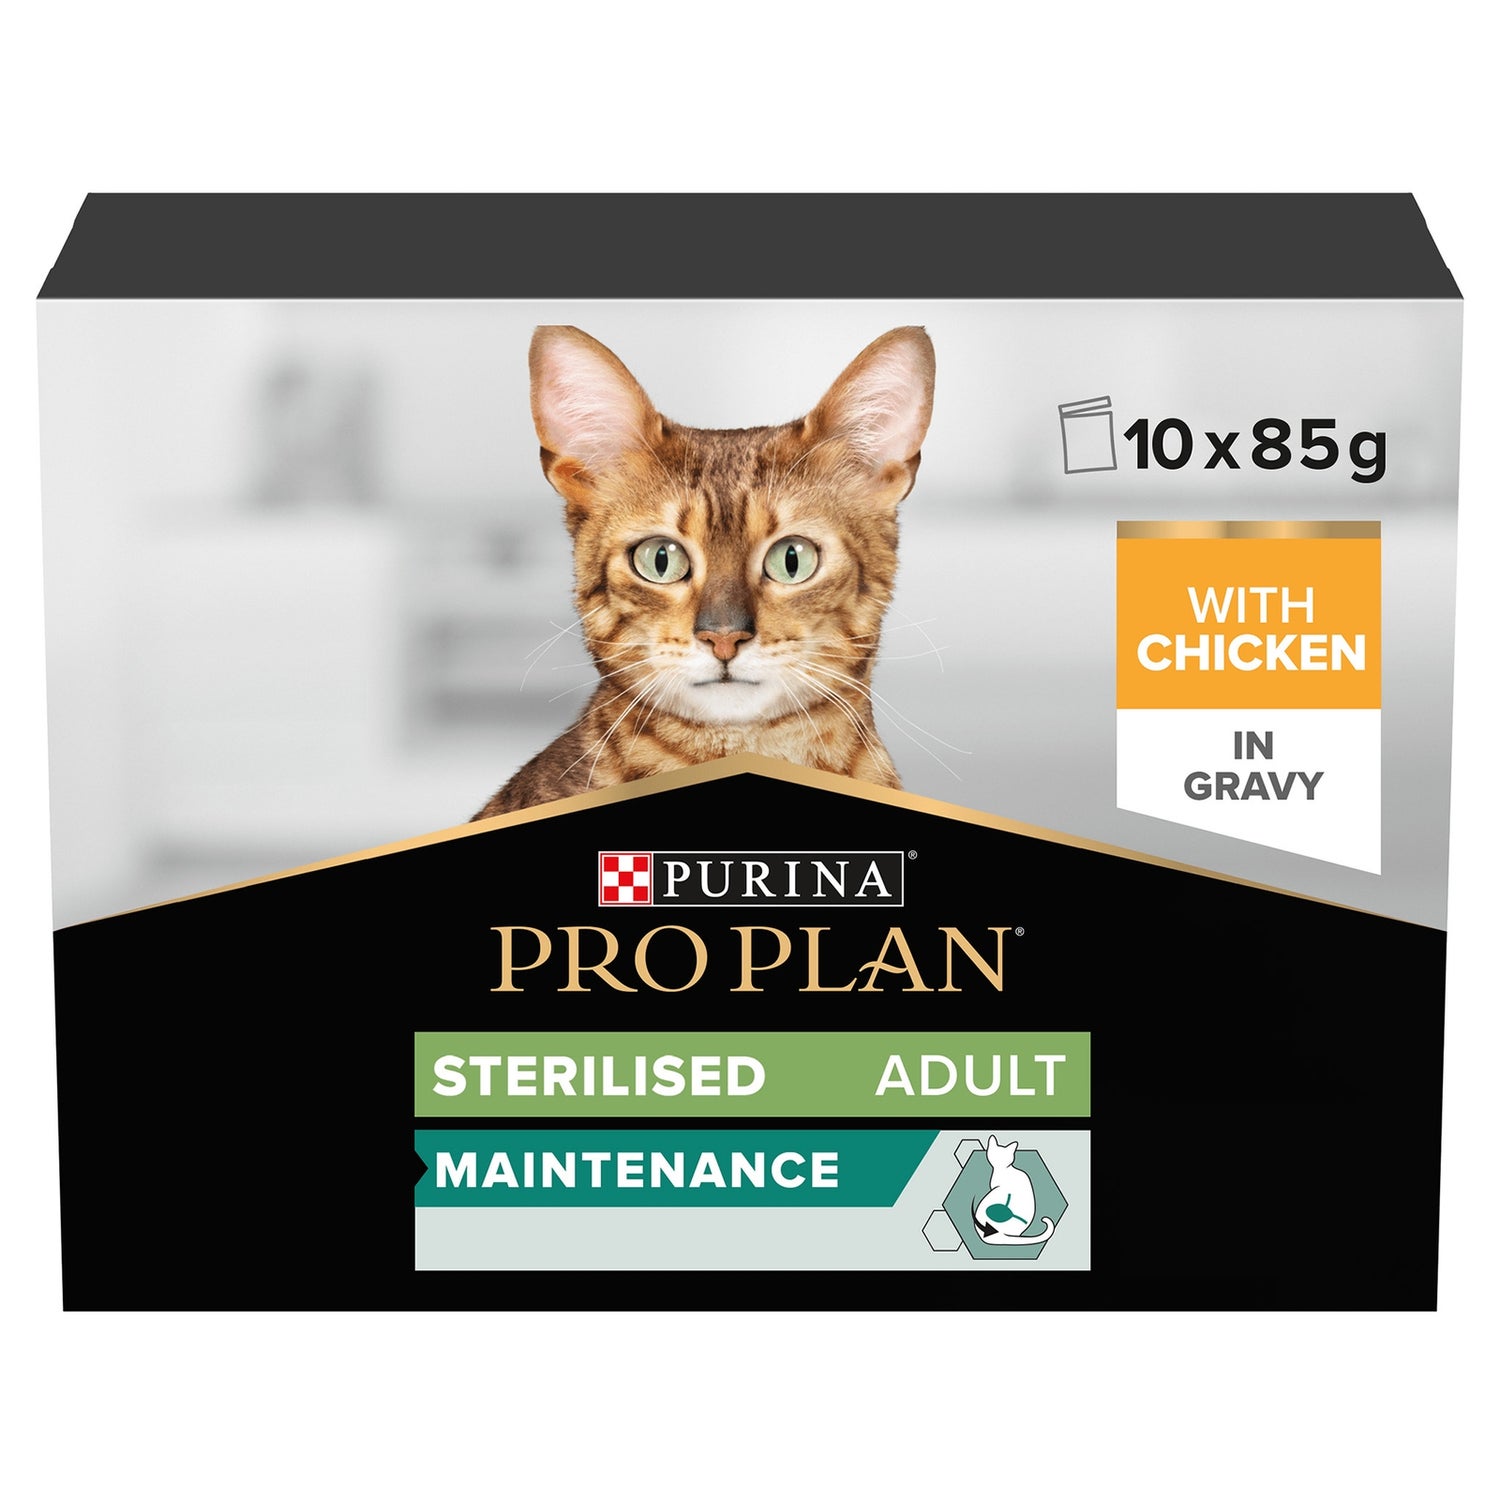 PRO PLAN NutriSavour Sterilised Adult Wet Cat Food with Chicken in Gravy 10x85g